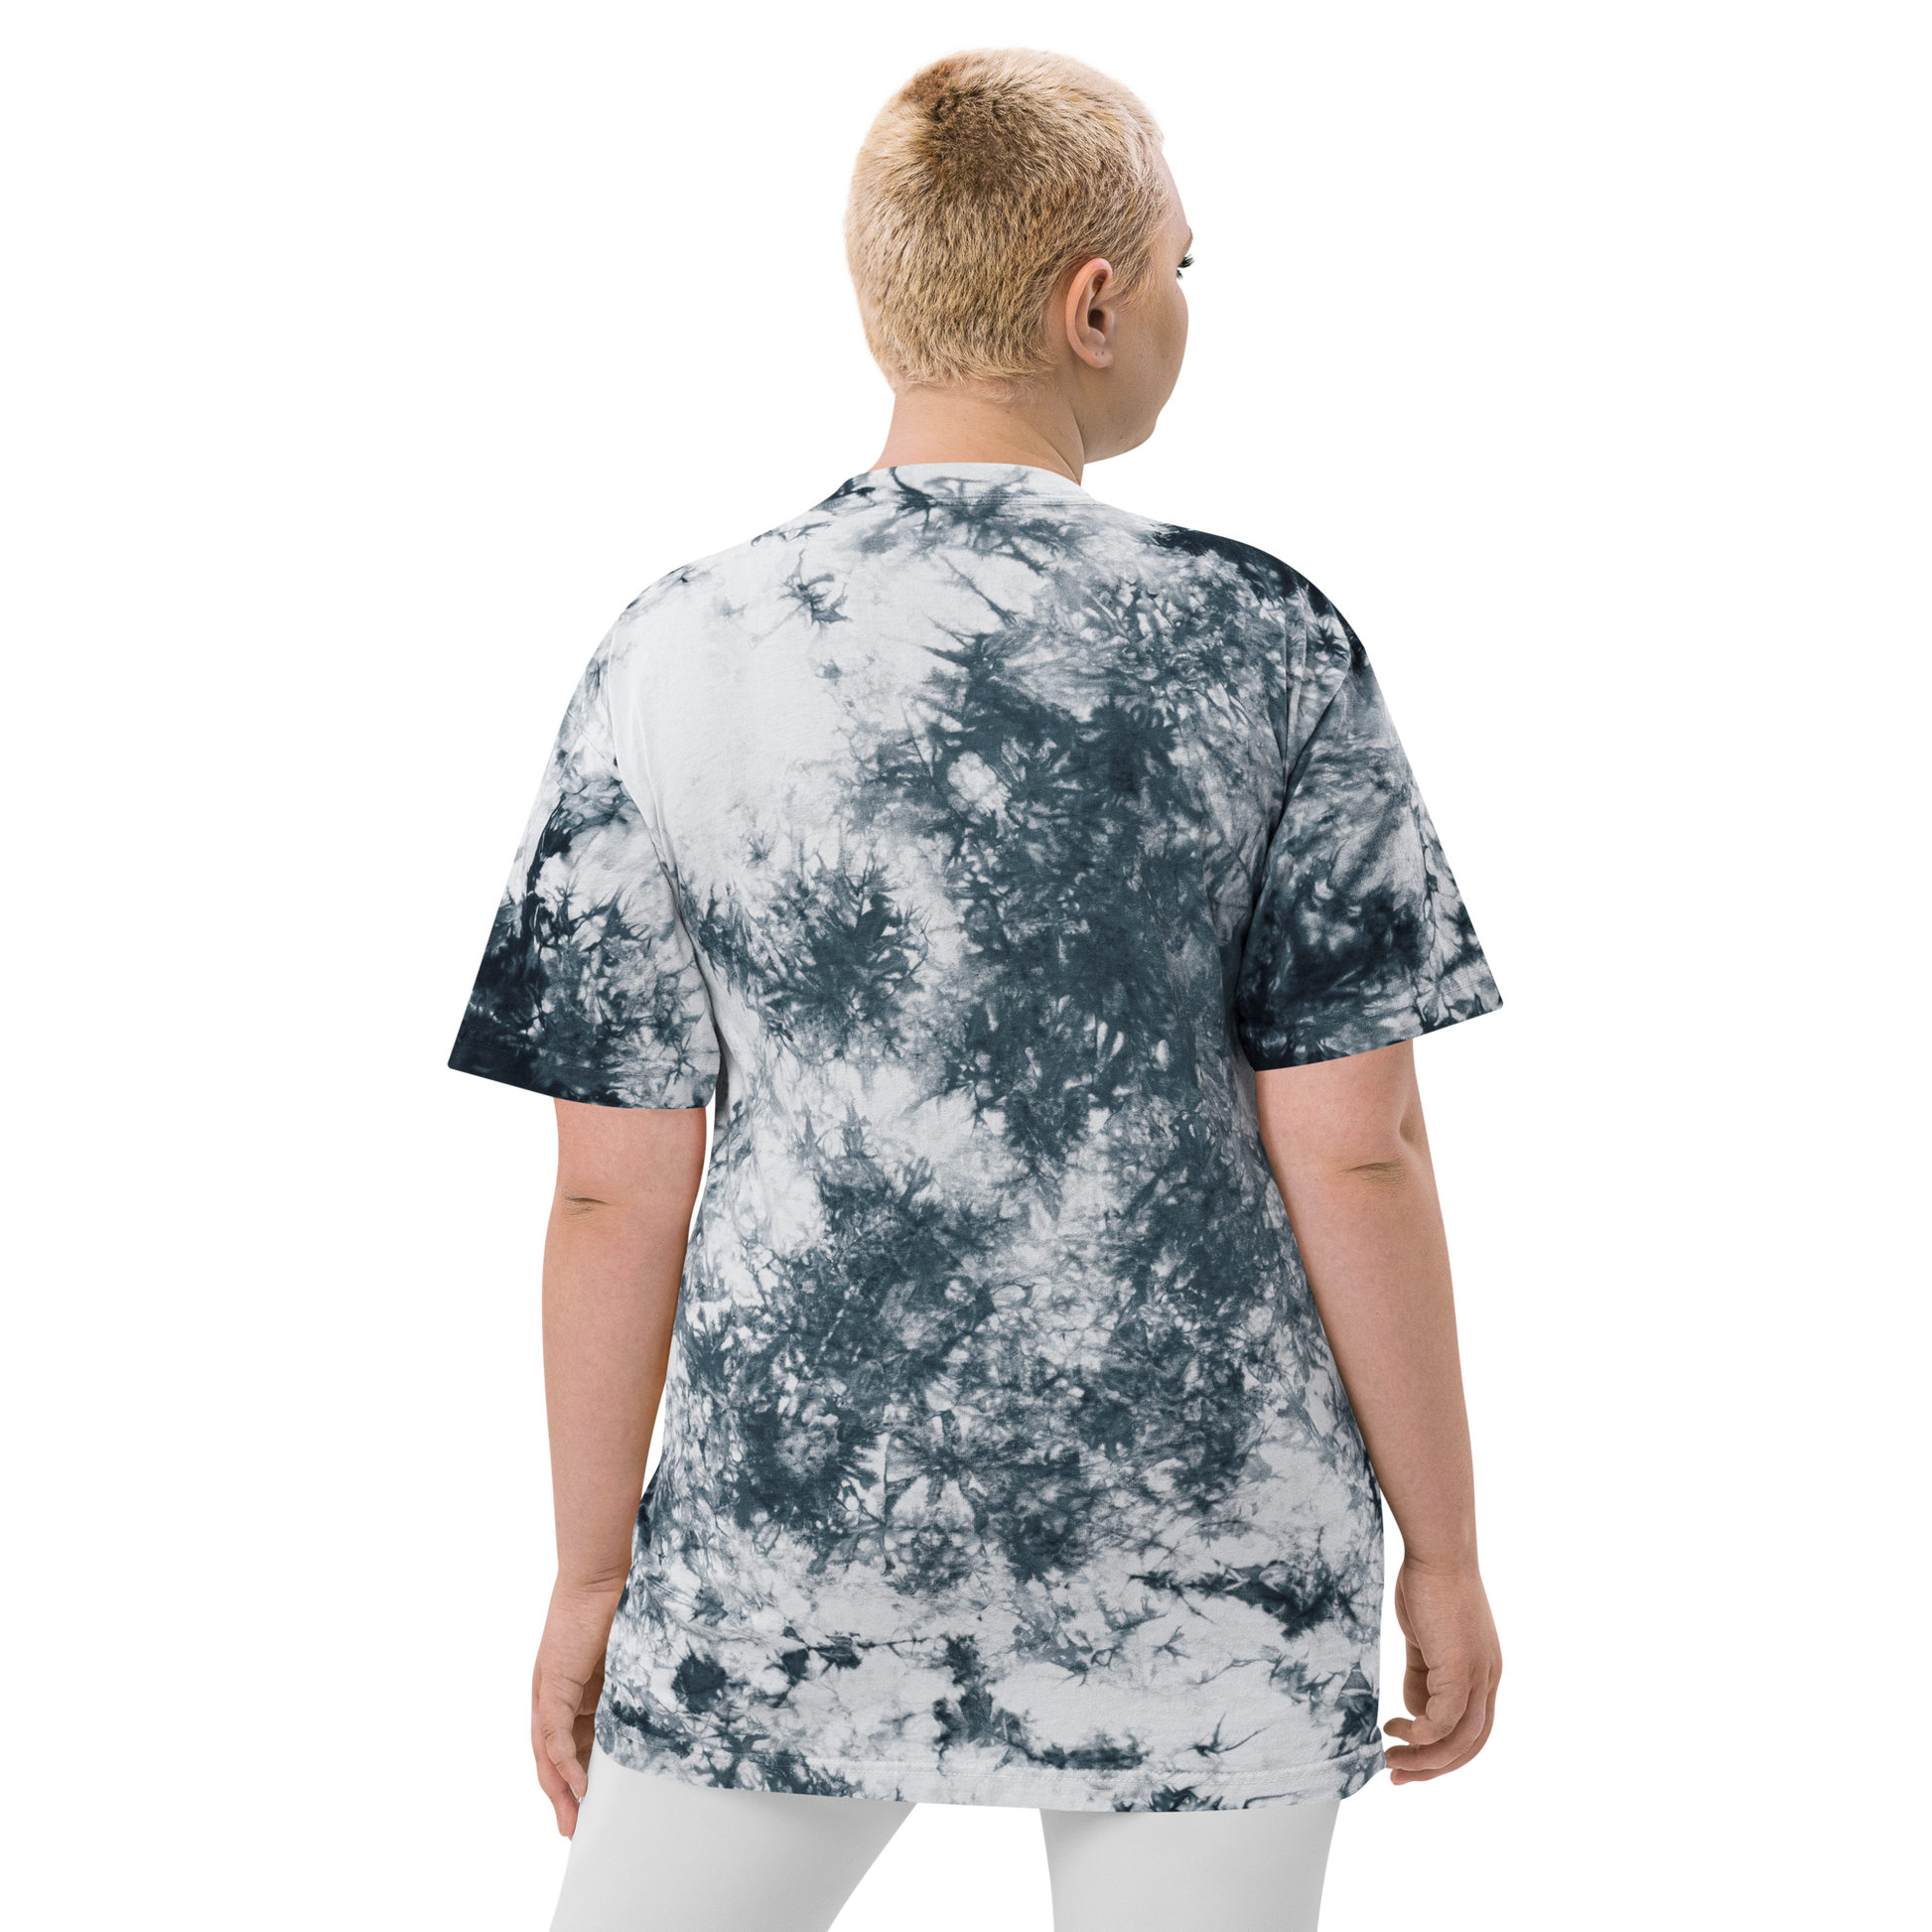 Crossed-X Oversized Tie-Dye T-Shirt • YMM Fort McMurray • YHM Designs - Image 17